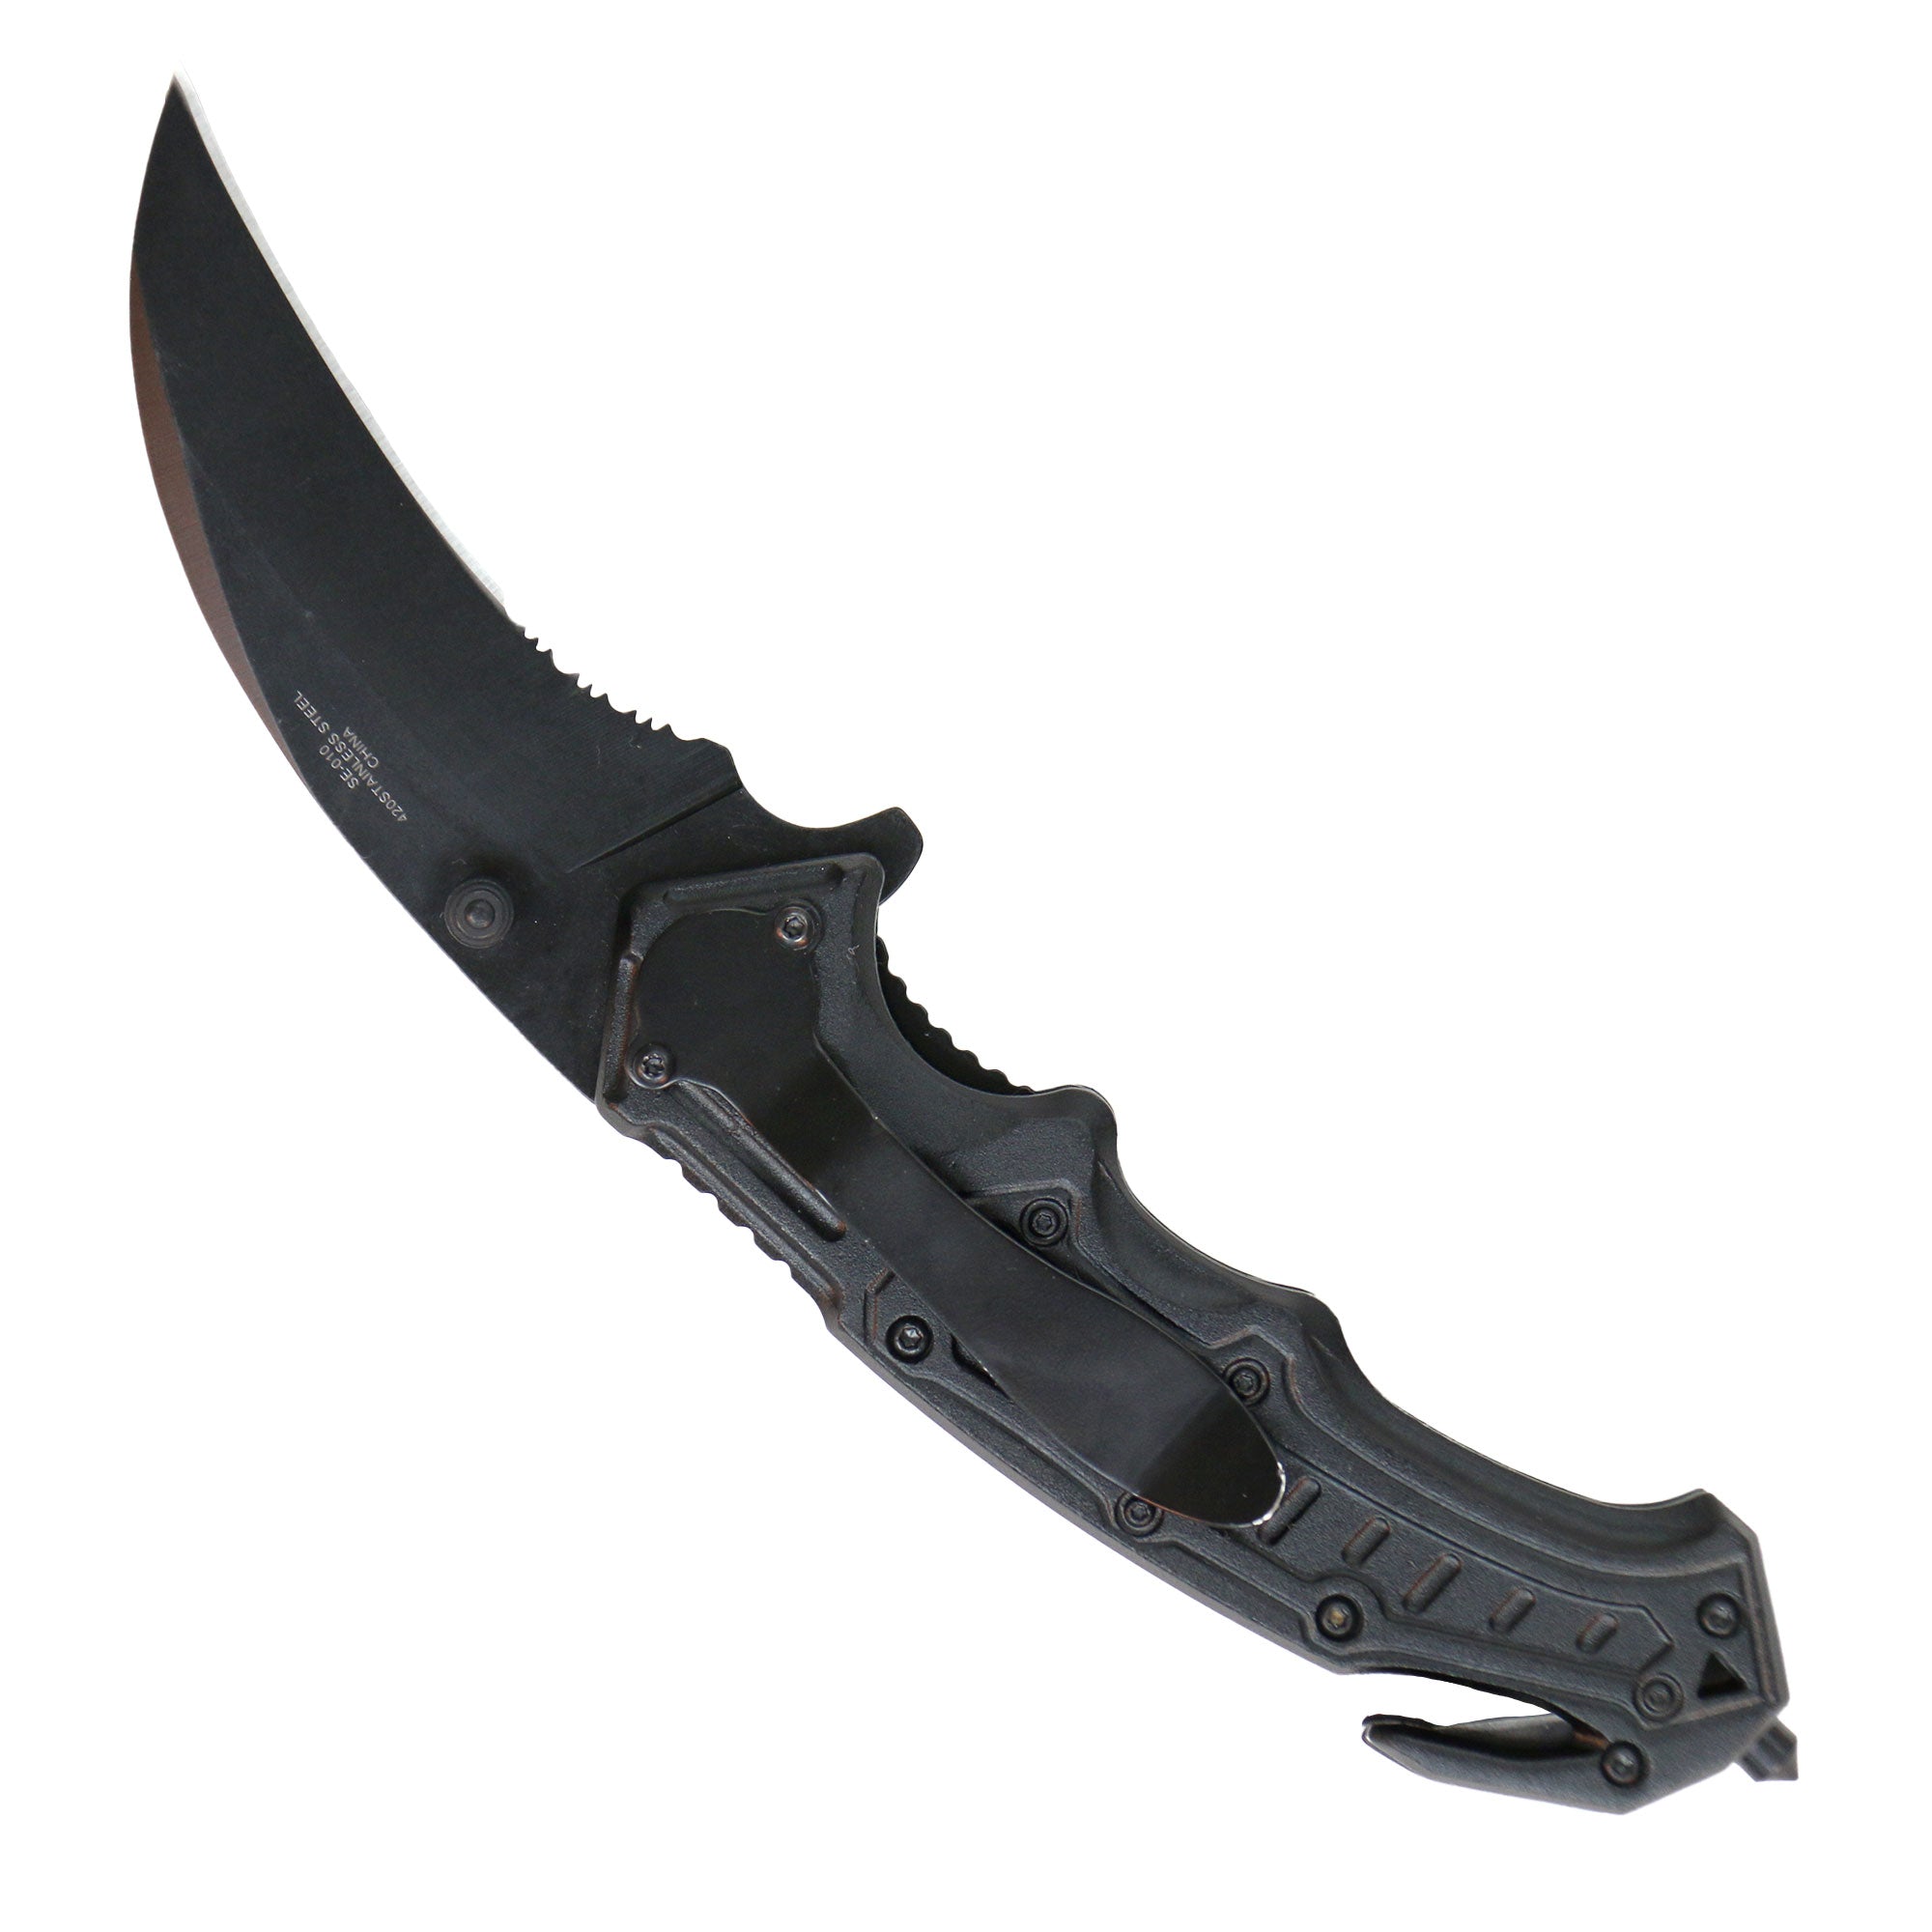 Hot Leathers Hawksbill Tactical Blade KNA1162